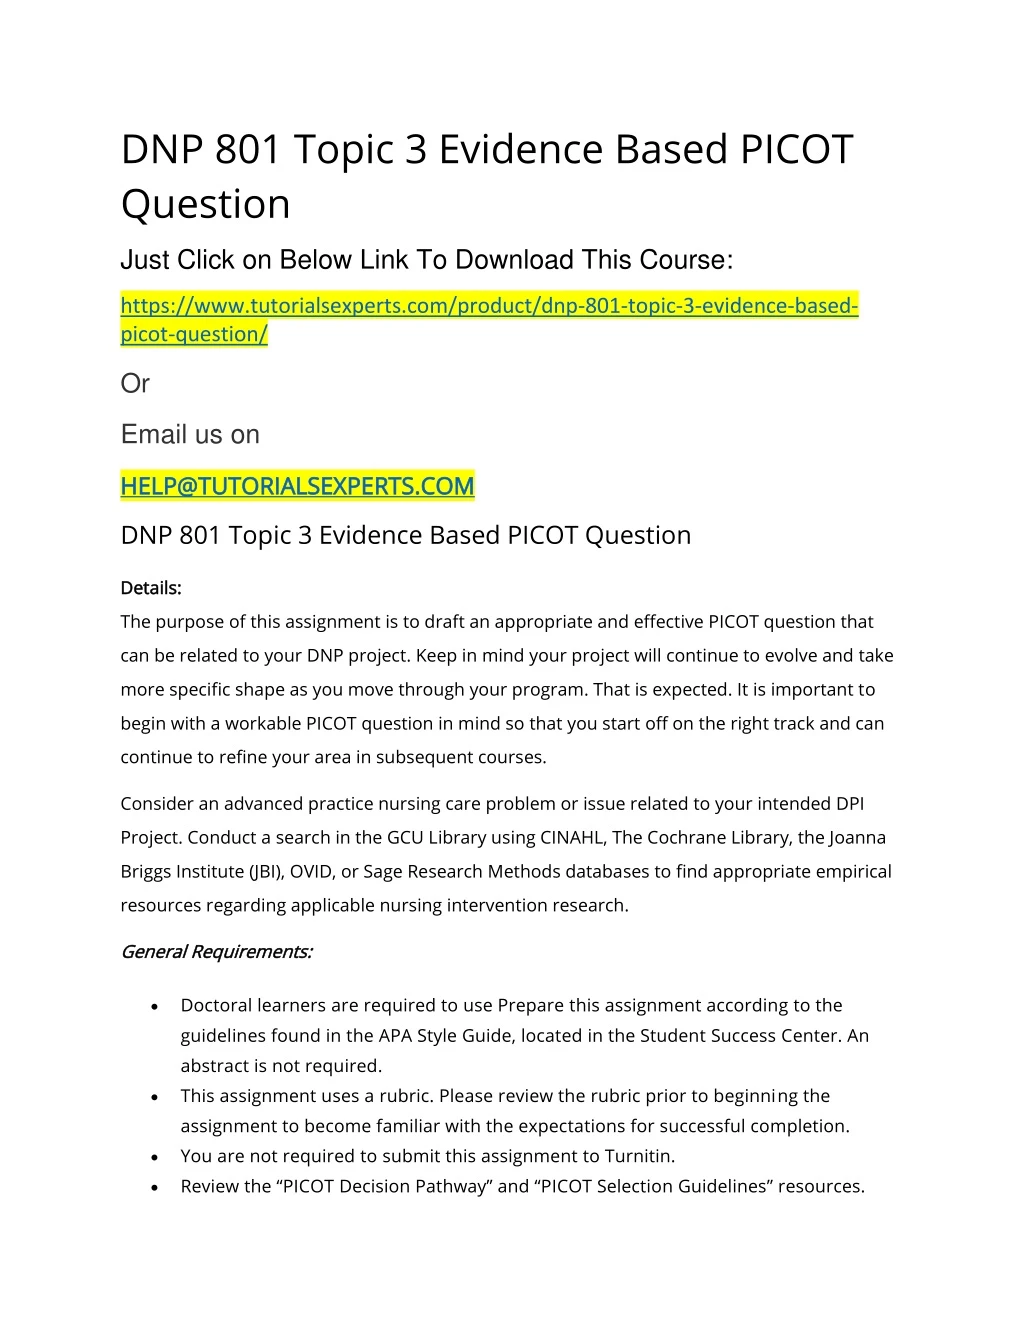 dnp 801 topic 3 evidence based picot question